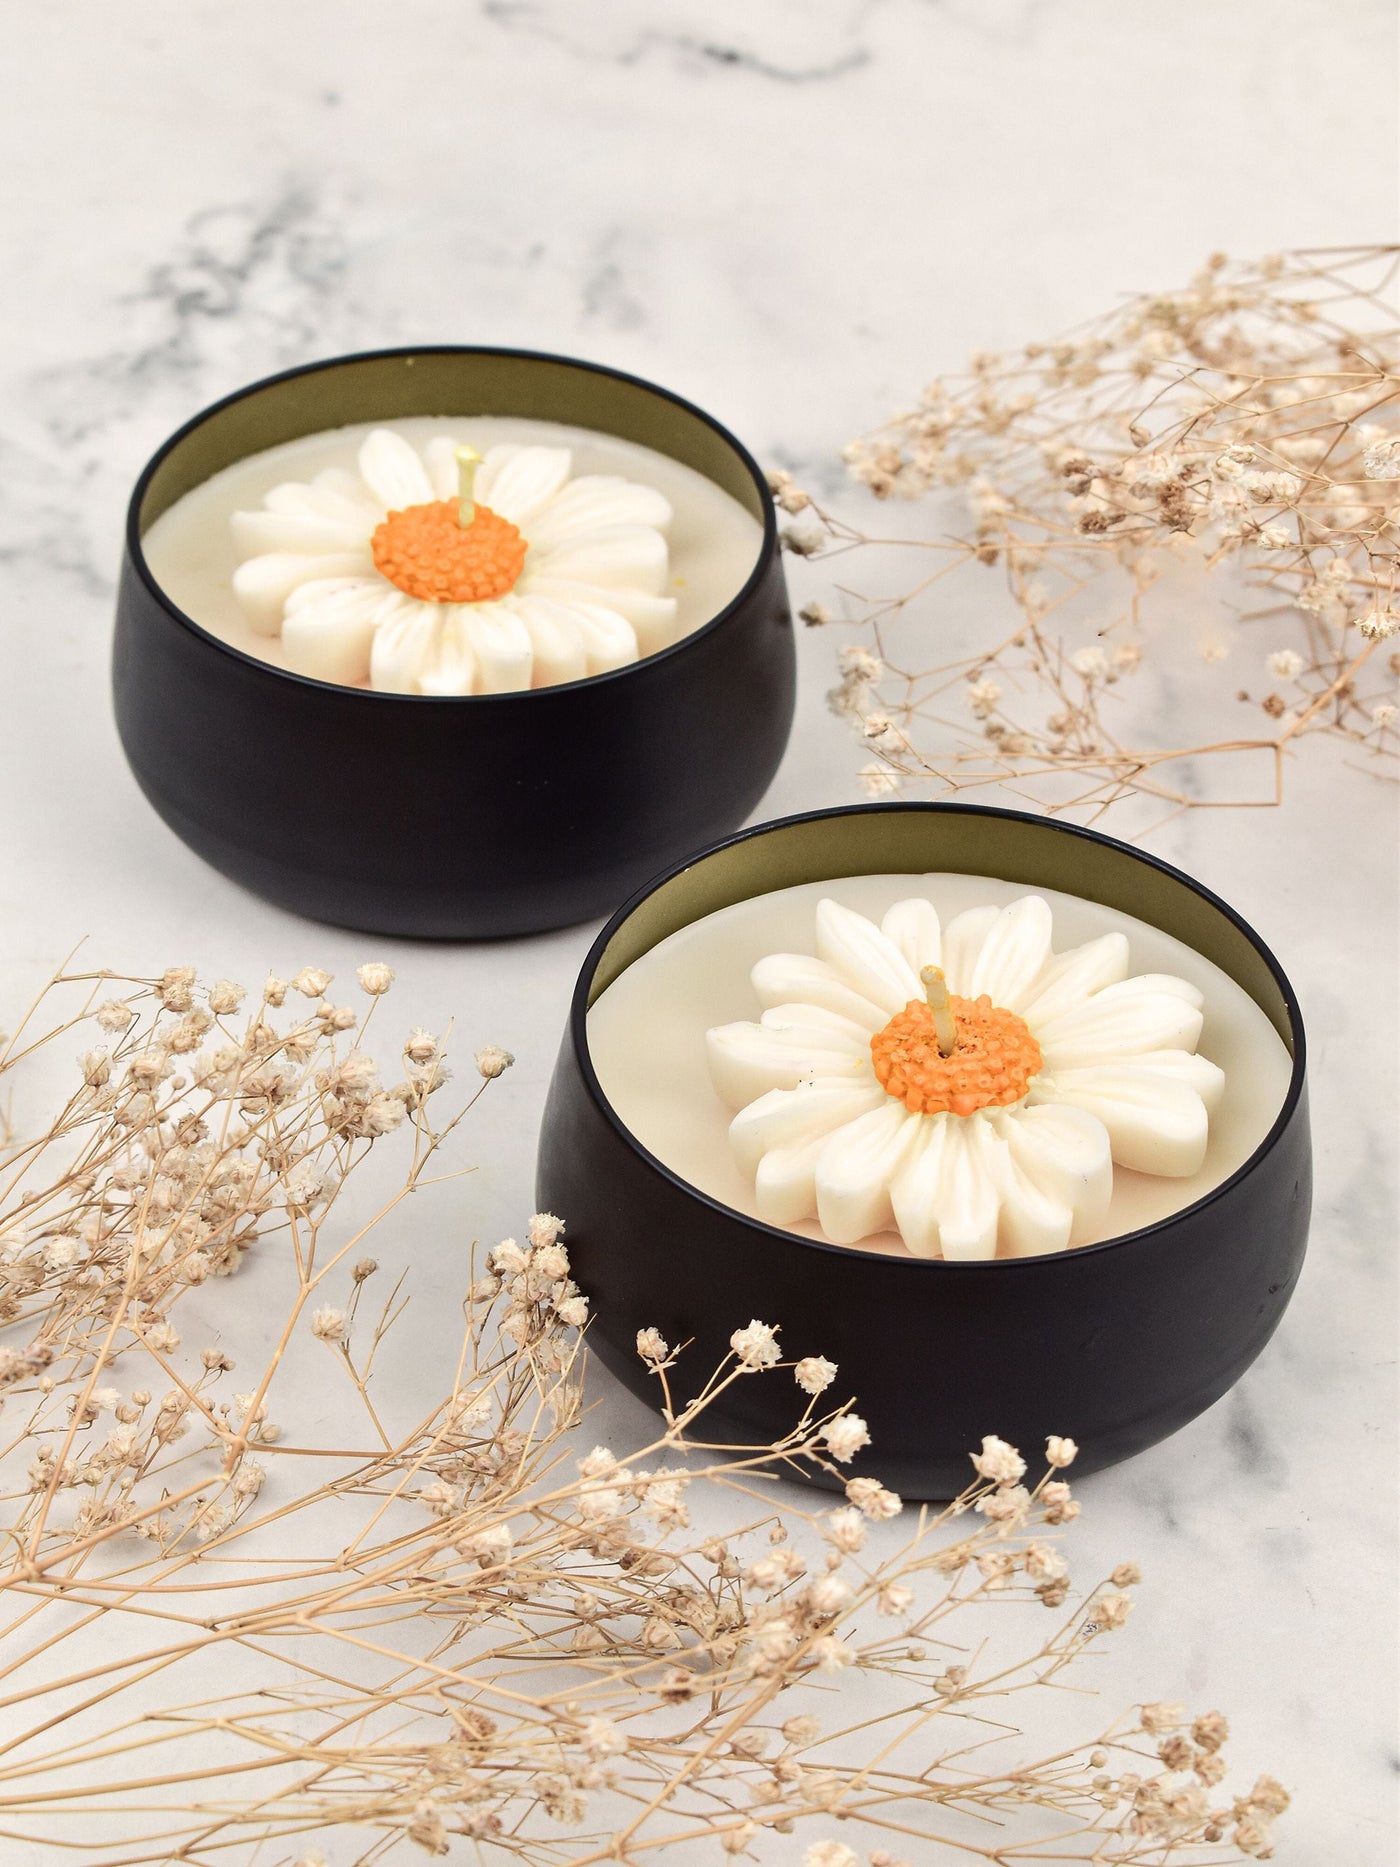 White Daisy Flower Soy Wax Candle